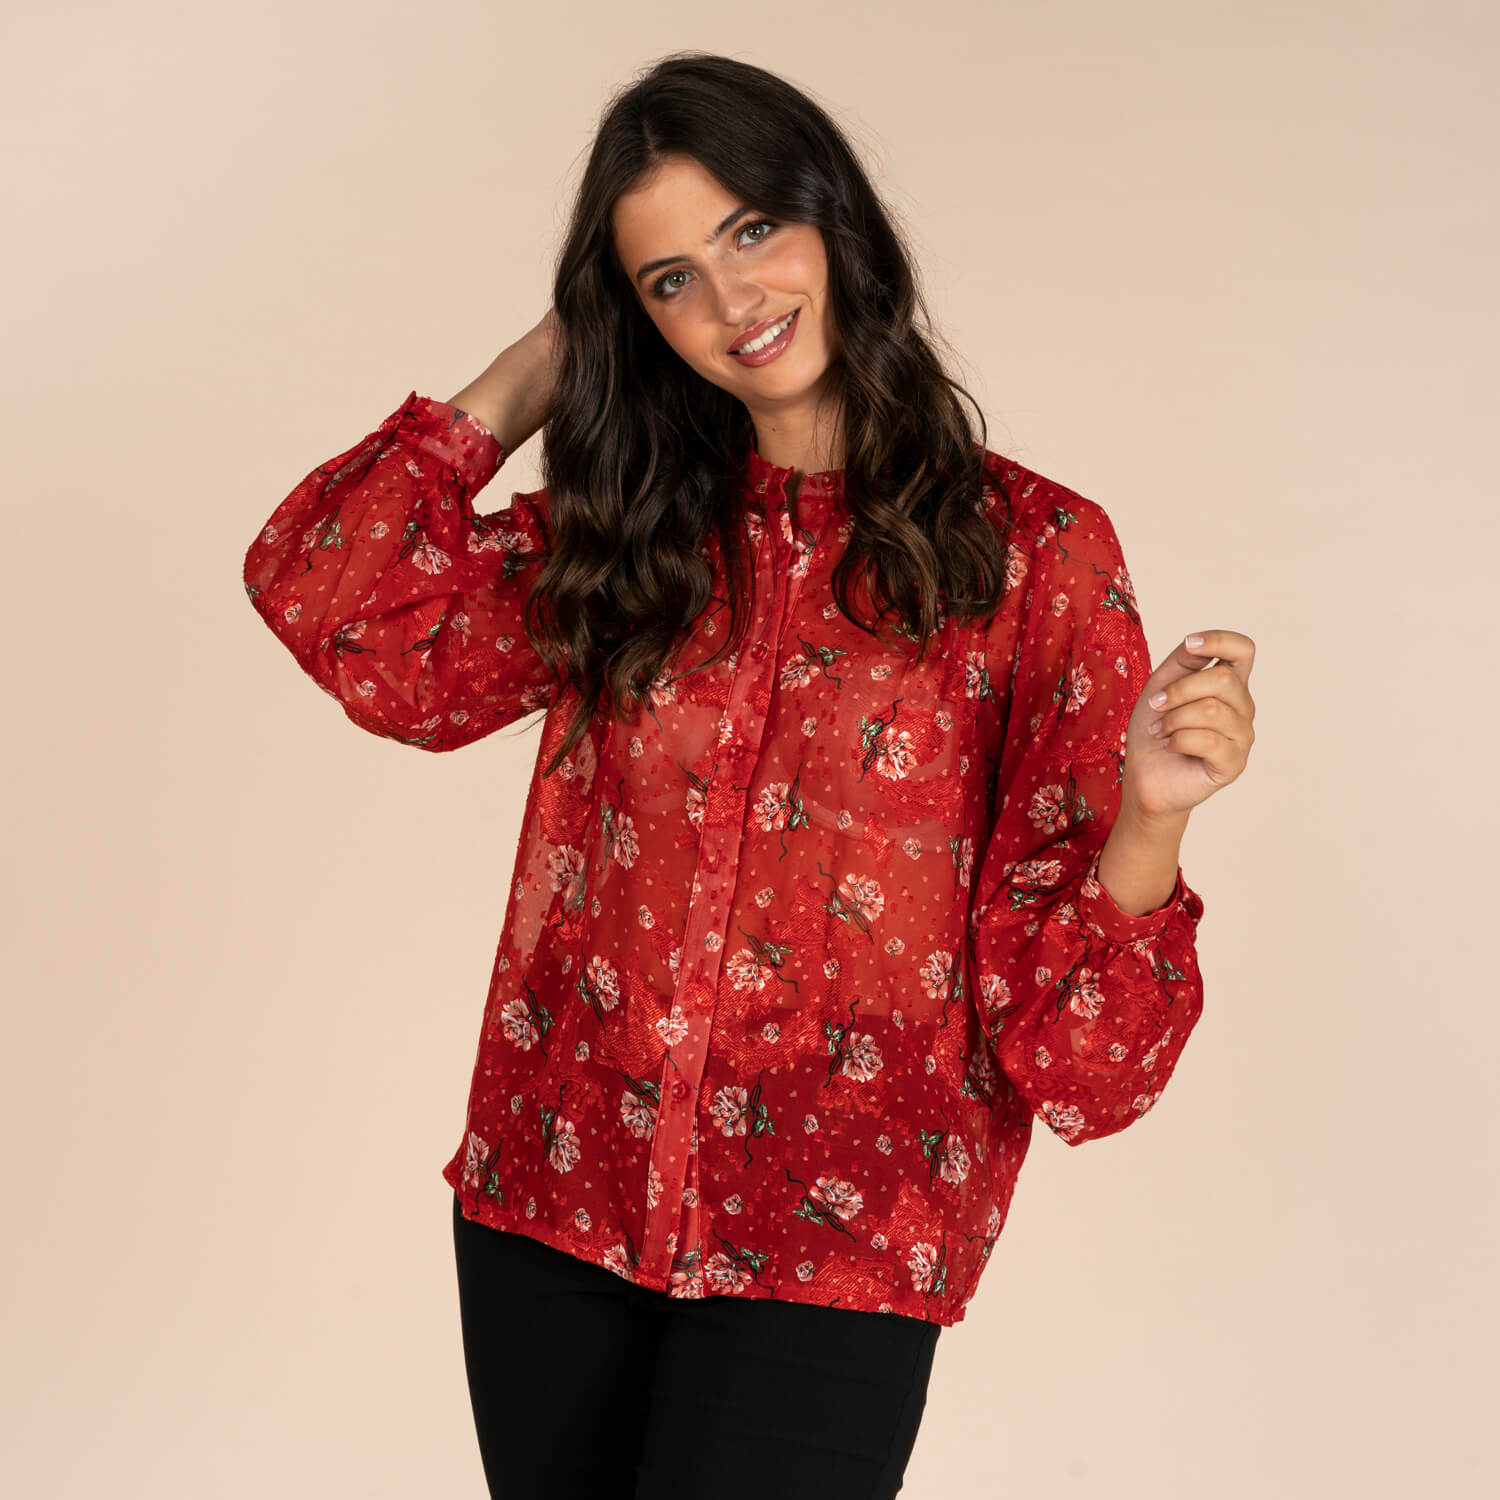 Naoise Pleat Neck Blouse - Red 1 Shaws Department Stores